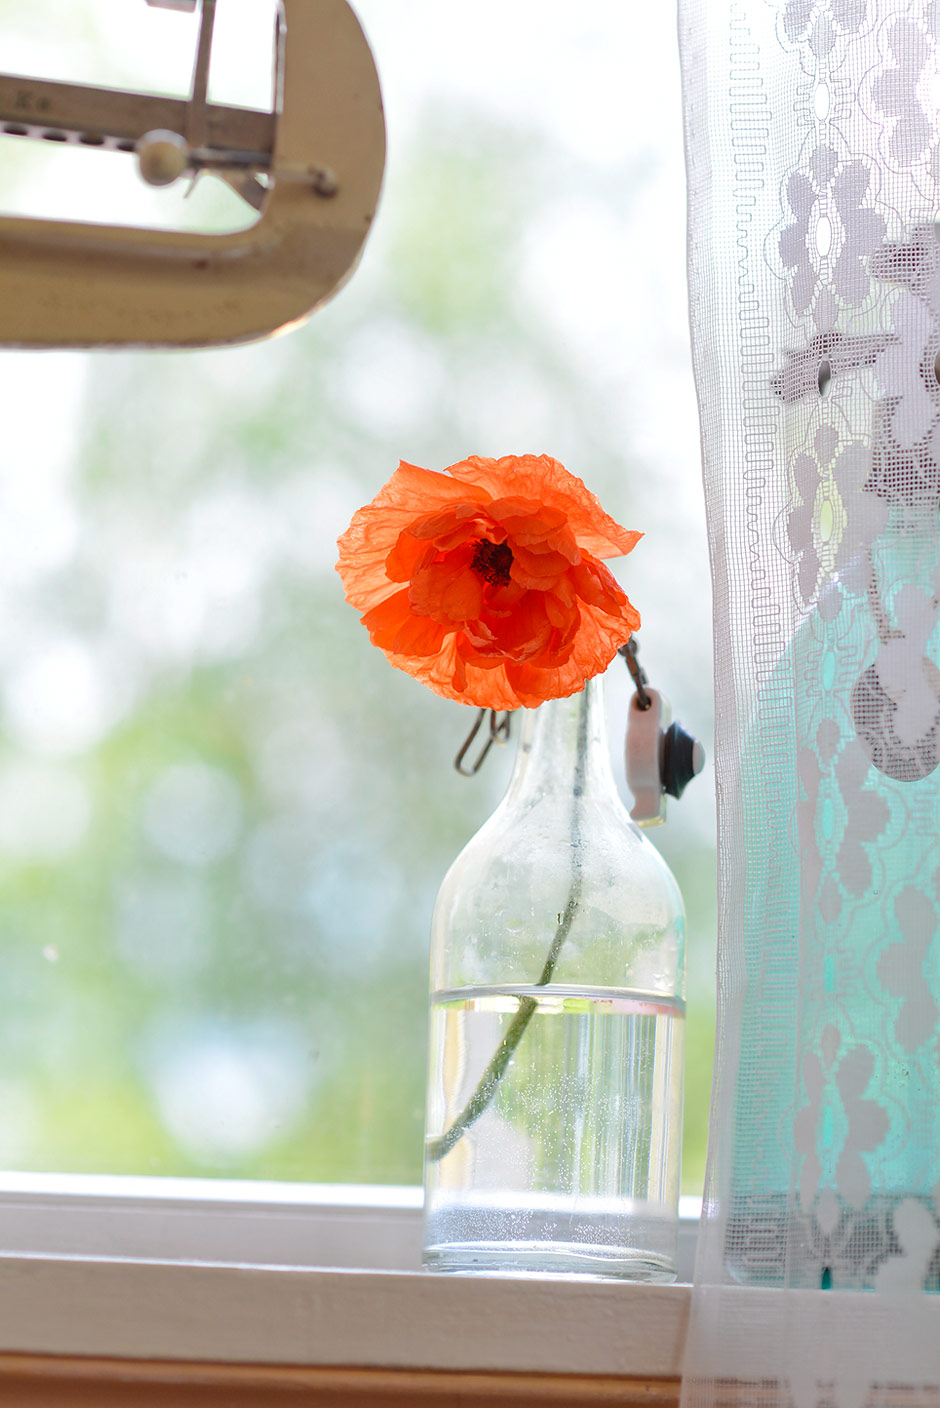 My Favorites: Red Poppies